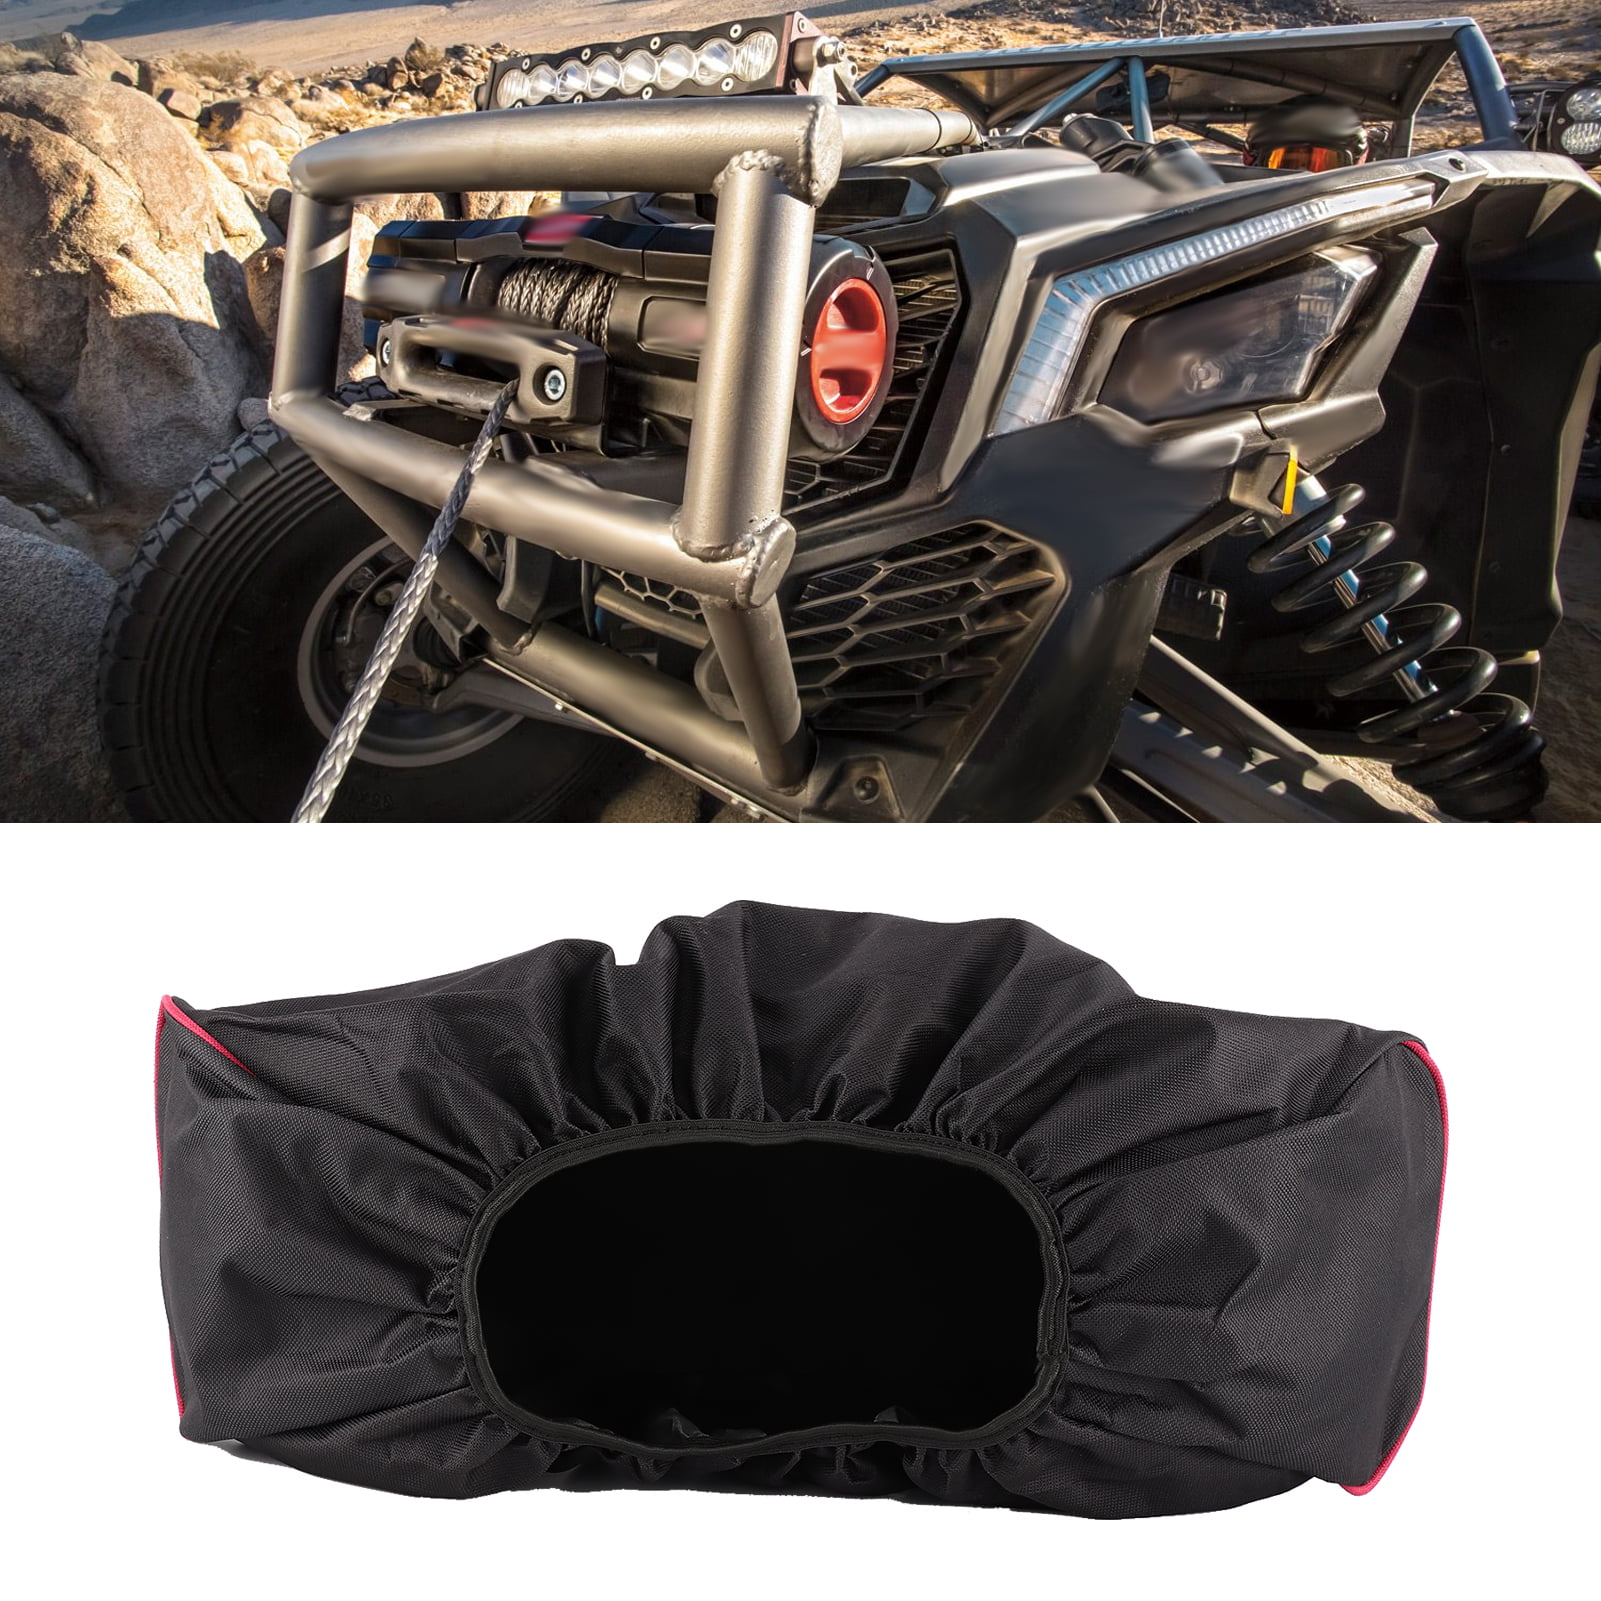 Winch Cover,Waterproof Winch Cover Oxford Cloth 21.5x9.5in/546x241mm Suitable for 8,500 ‑ 17,500 lbs Winch